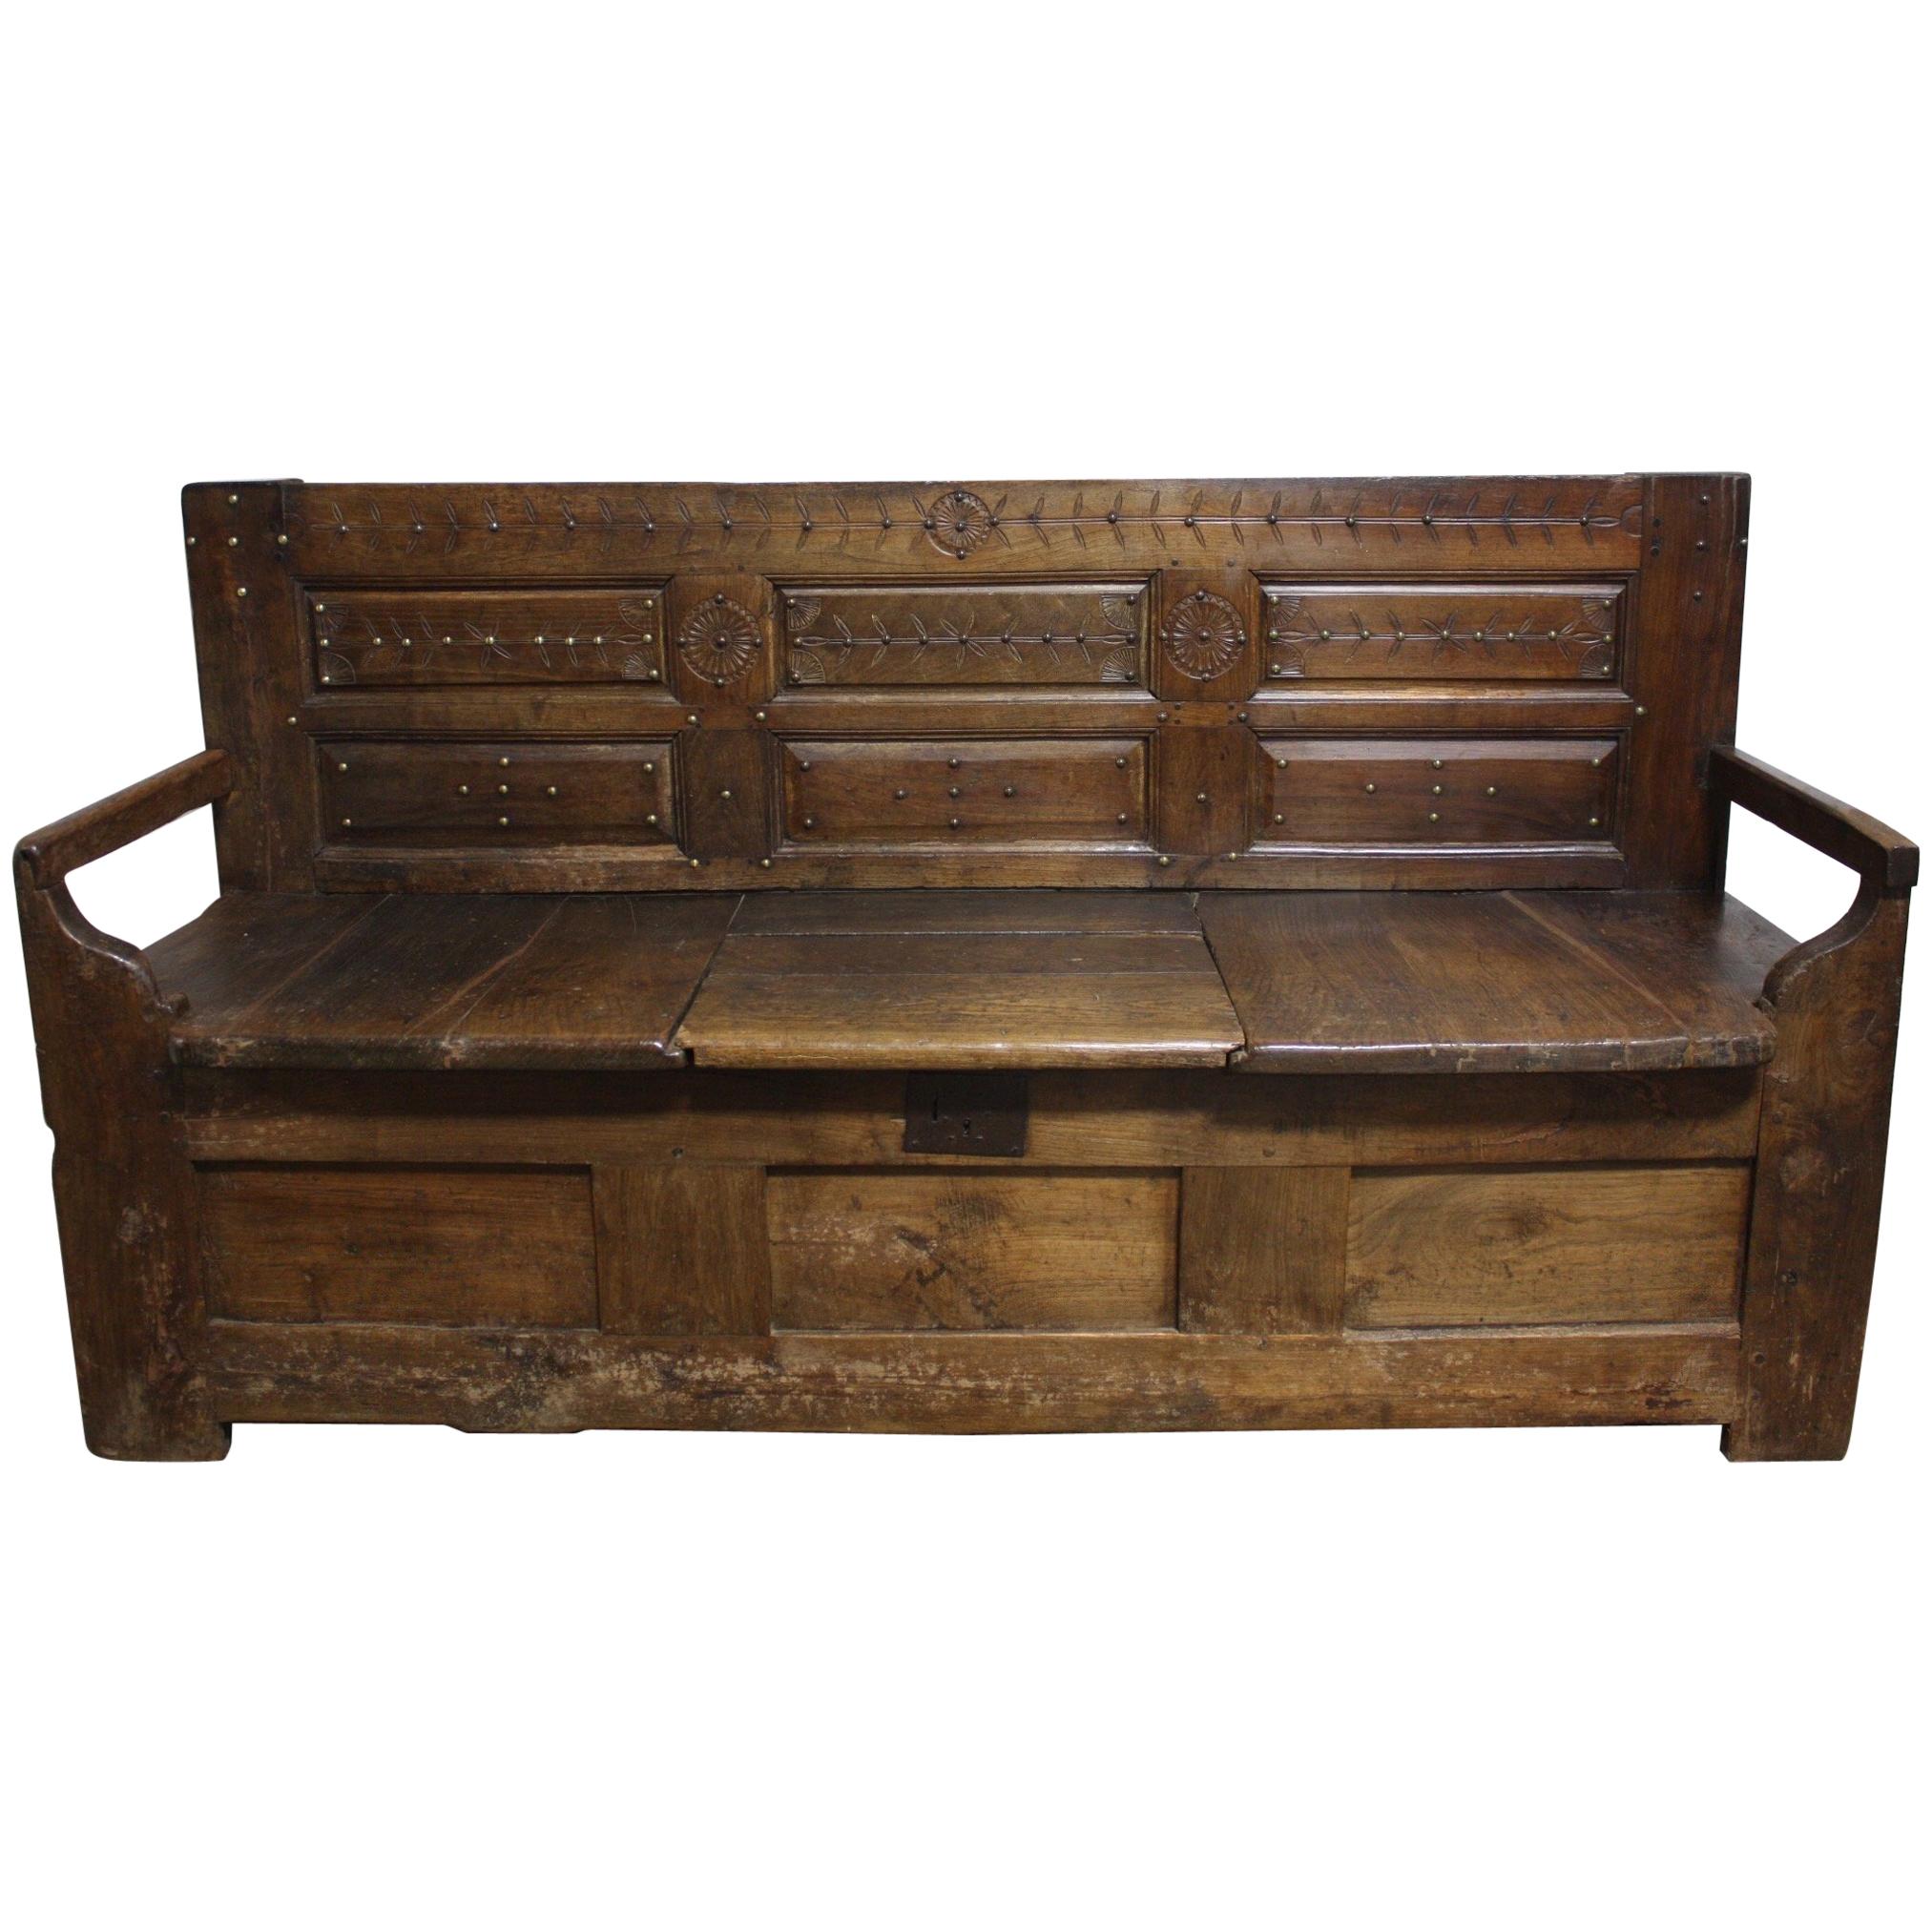 Early 18th Century French Bench